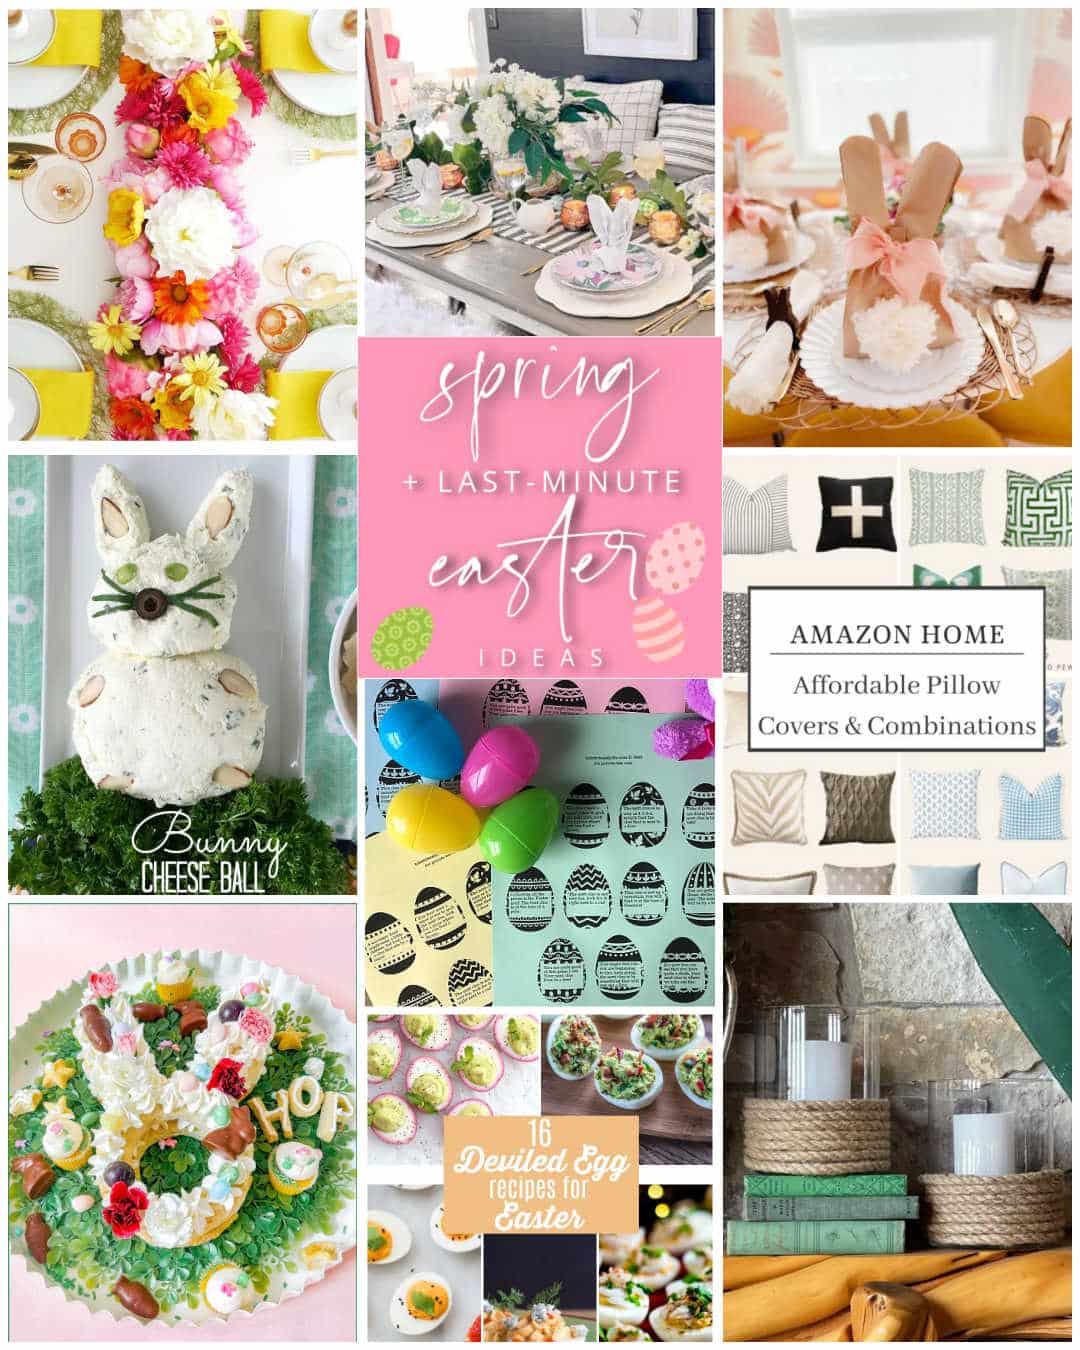 Spring Decorating and Recipes. Get ready for warmer weather and Spring gatherings with these easy decorating and recipe ideas!